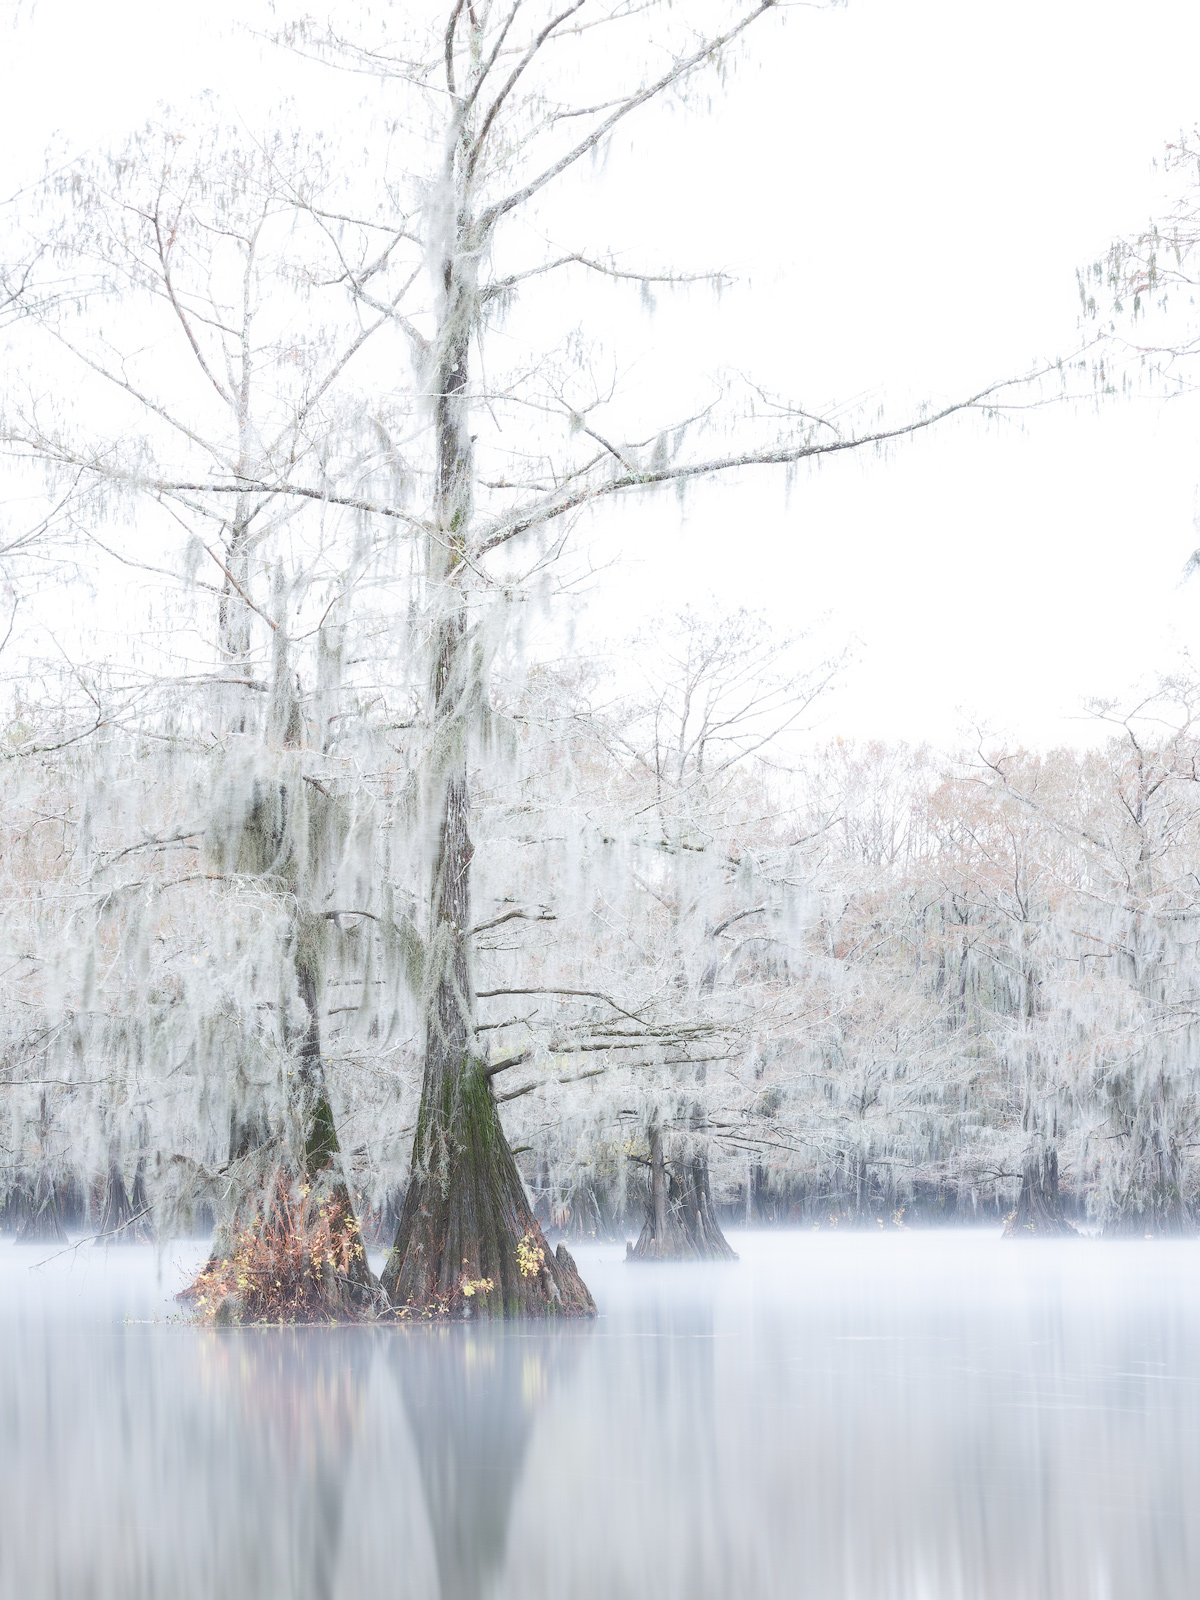 A high key rendition of cypress trees on a misty morning in the bayou.